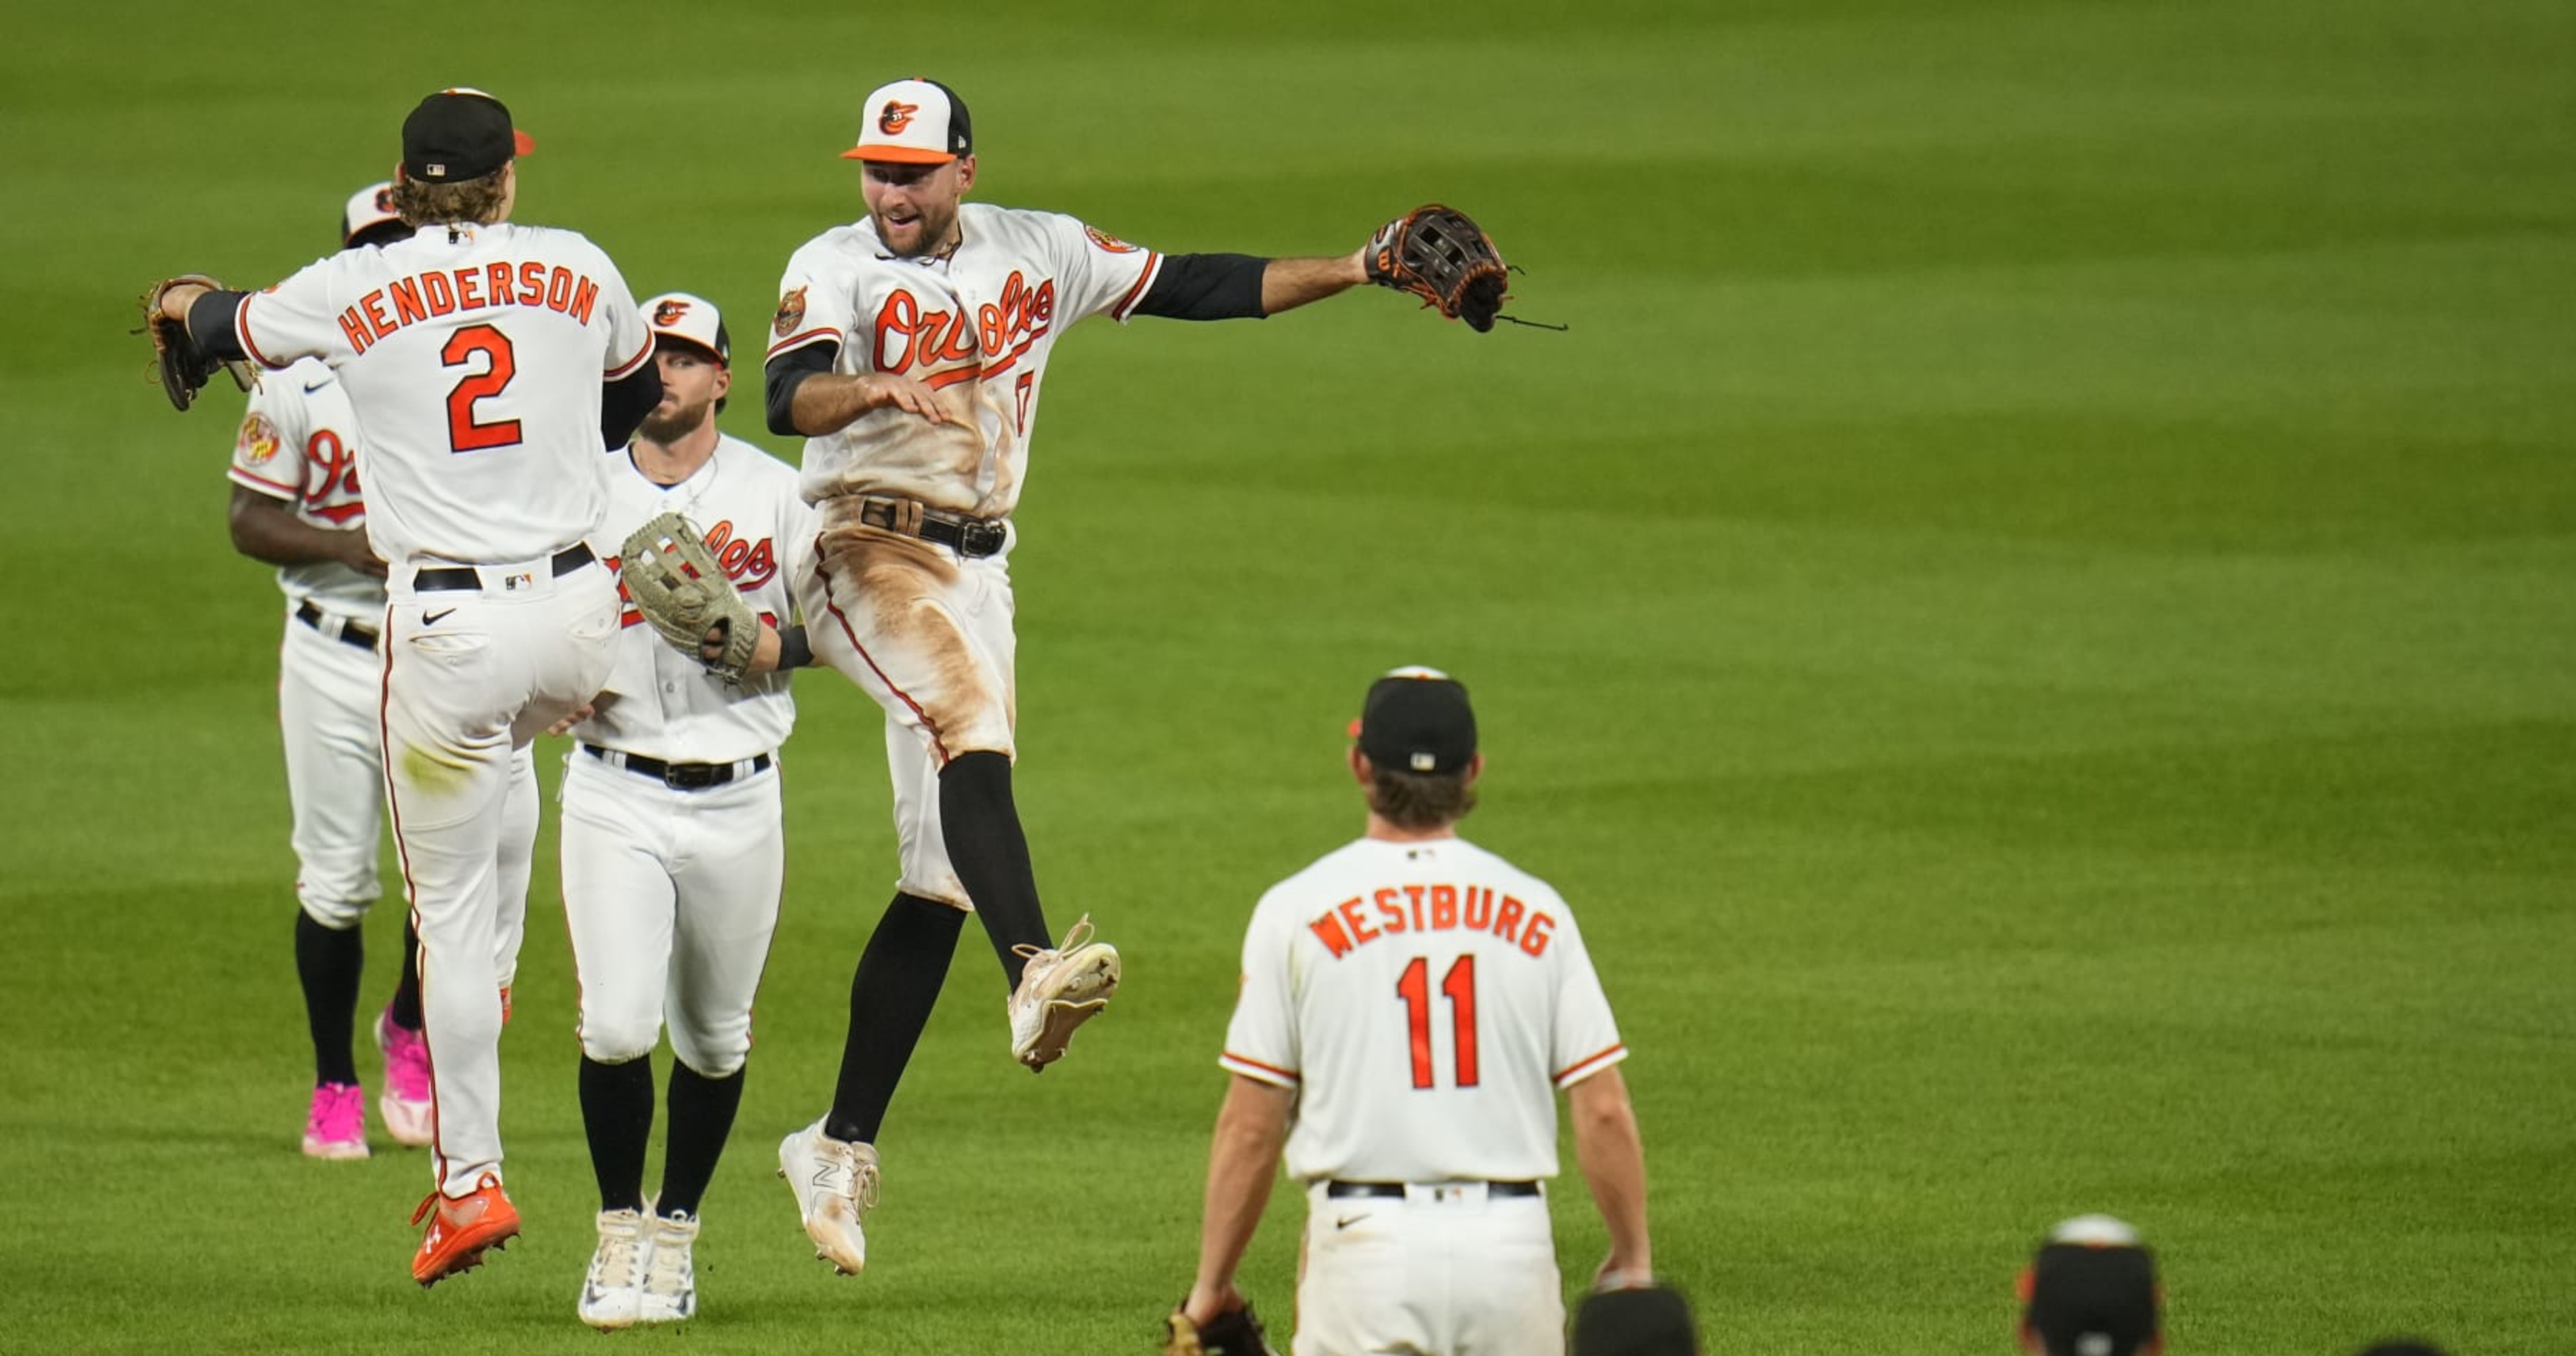 Orioles complete sweep of Angels - Global Times